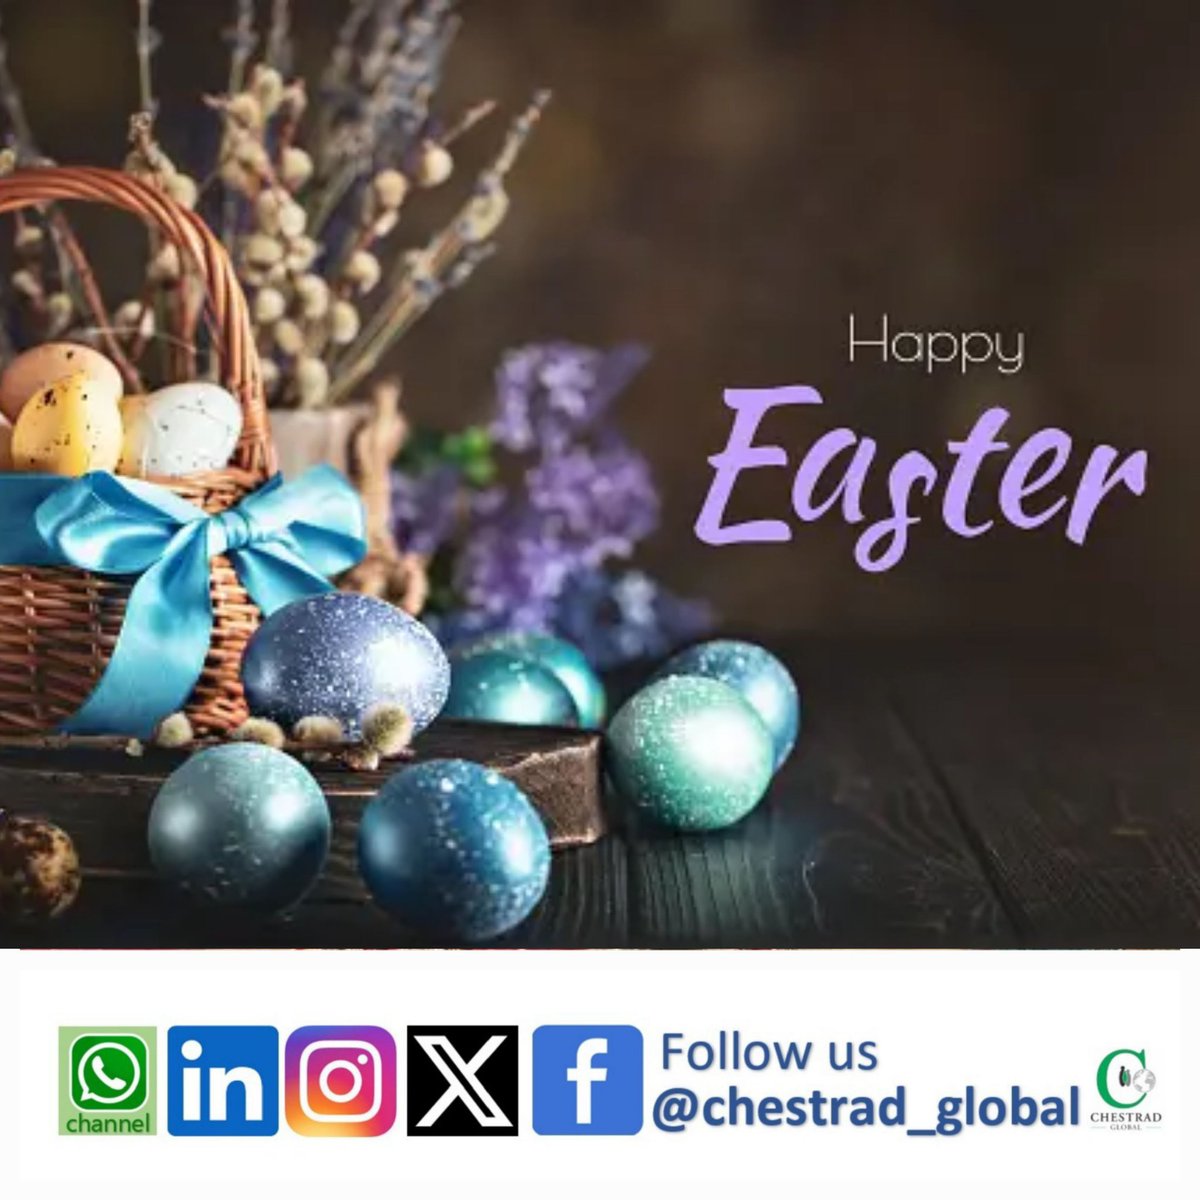 From me to you and you and you! #HappyEaster